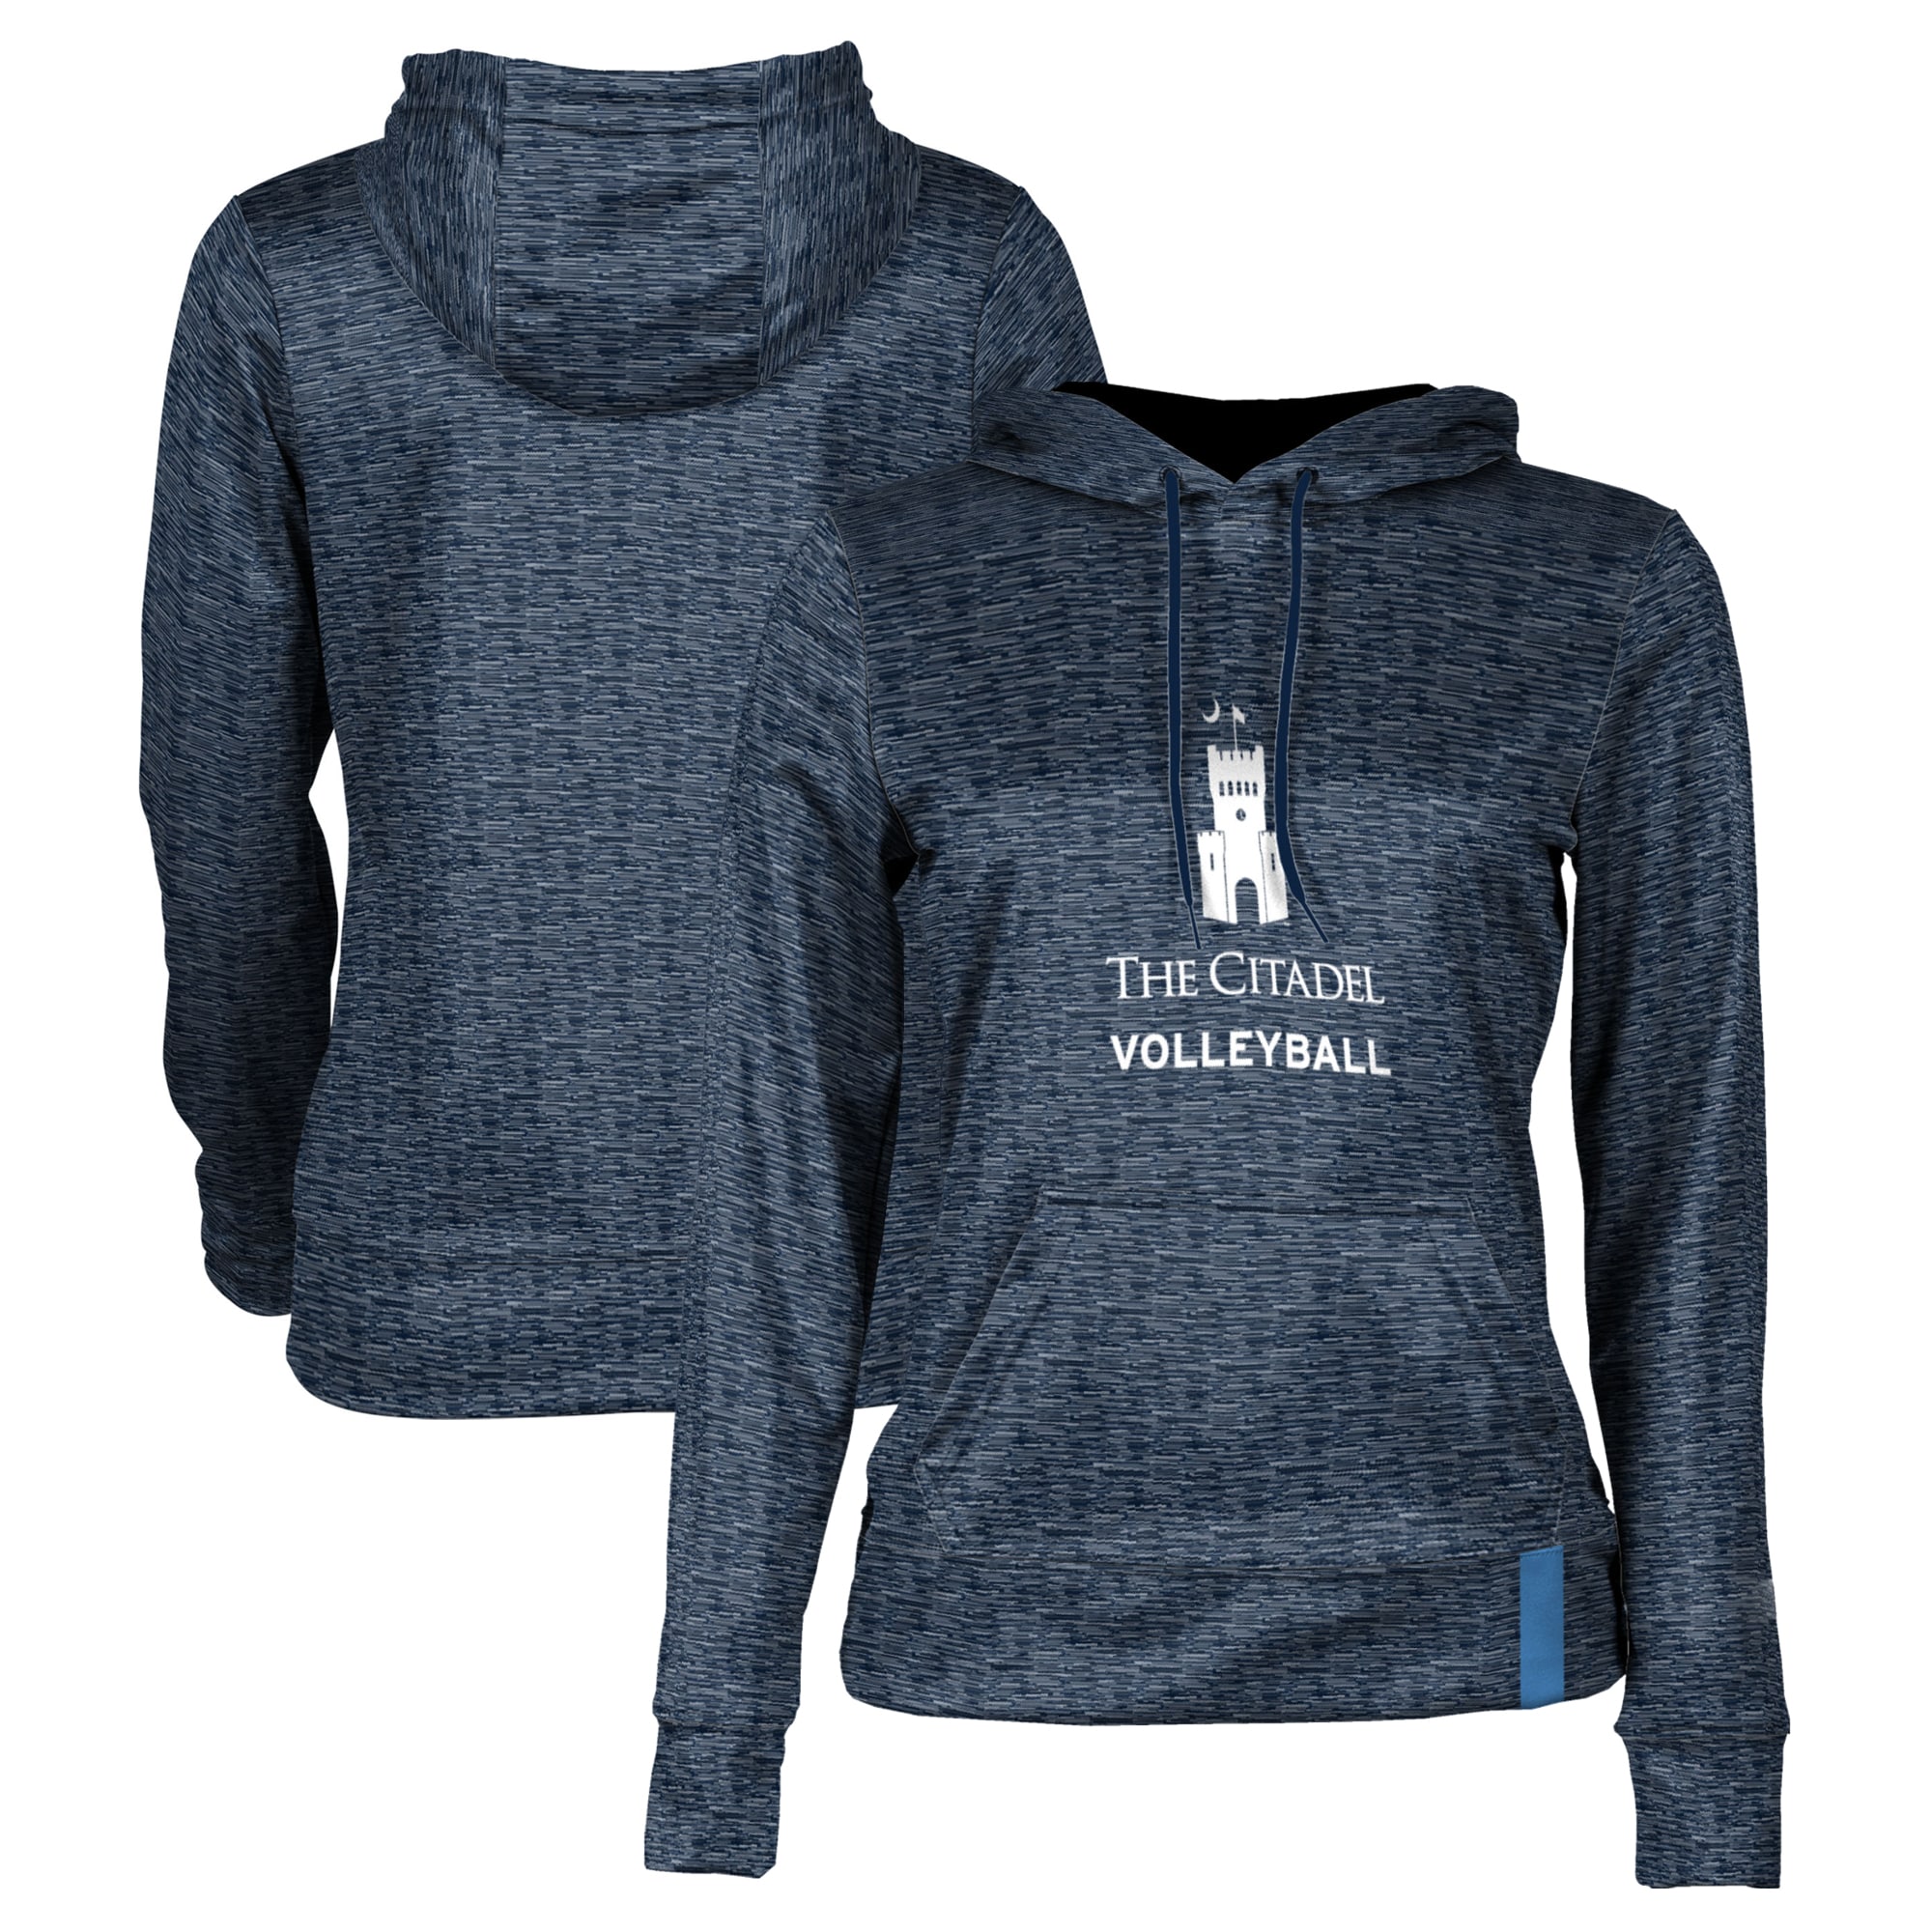 Women's Navy Citadel Bulldogs Volleyball Pullover Hoodie - image 1 of 3